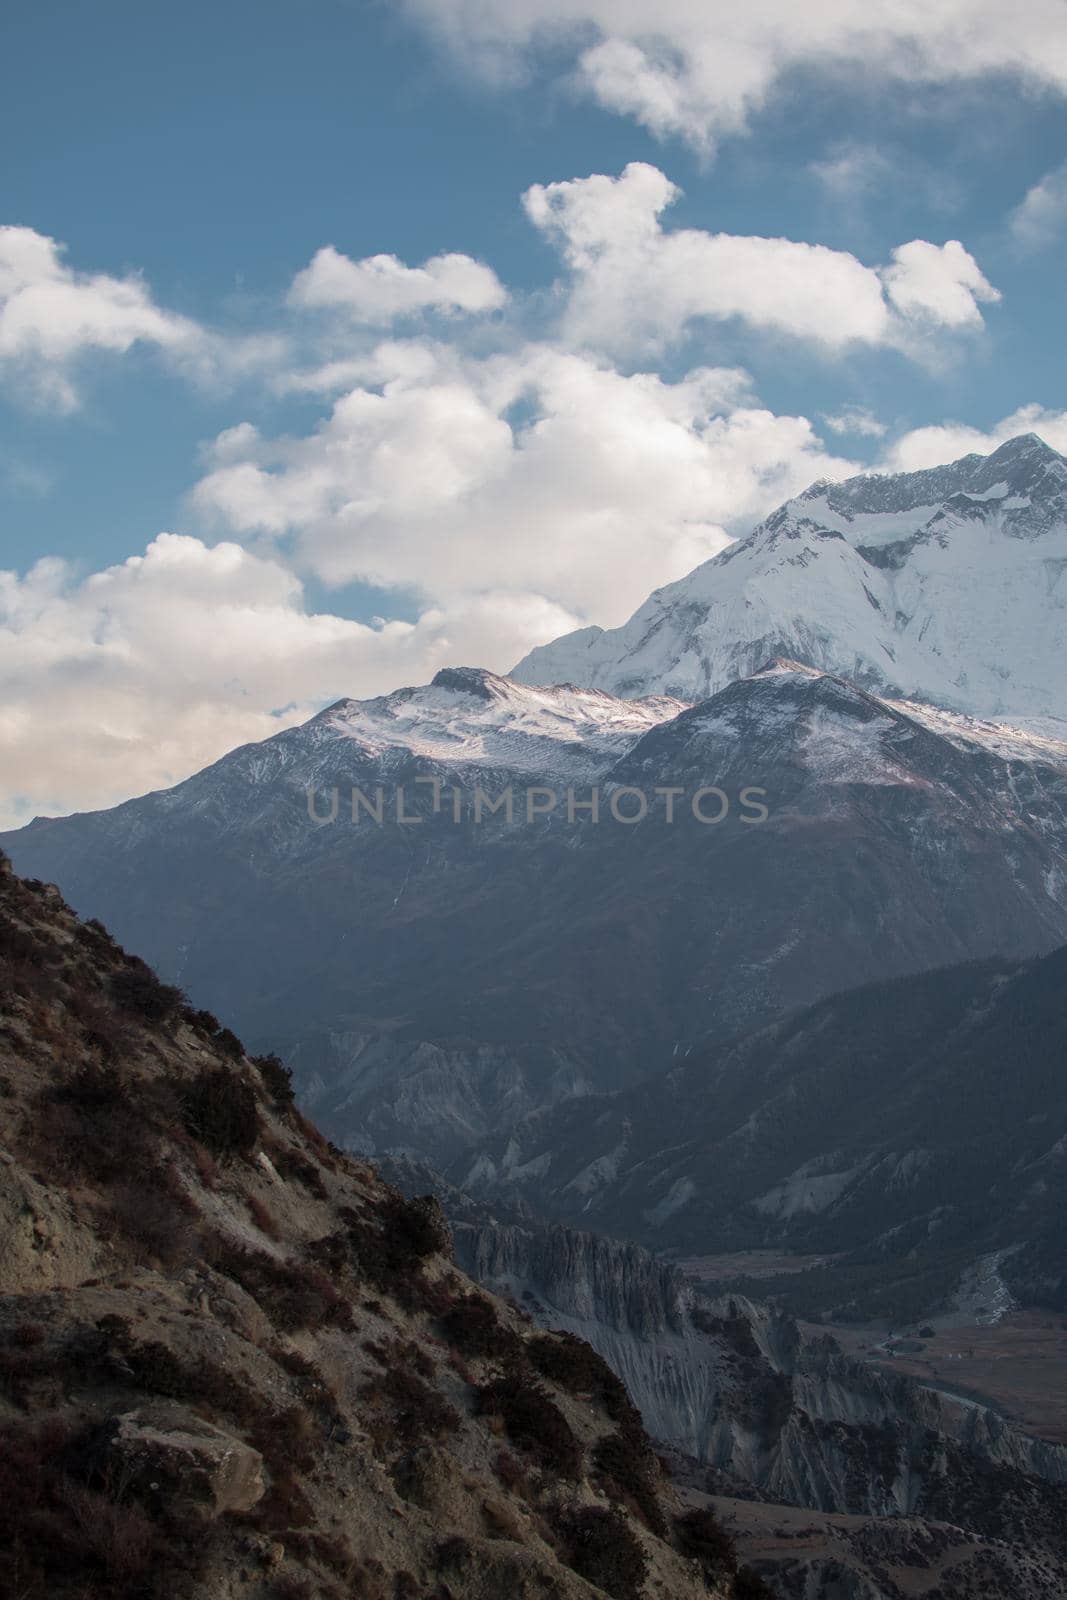 Mountains trekking Annapurna circuit, Marshyangdi river valley by arvidnorberg